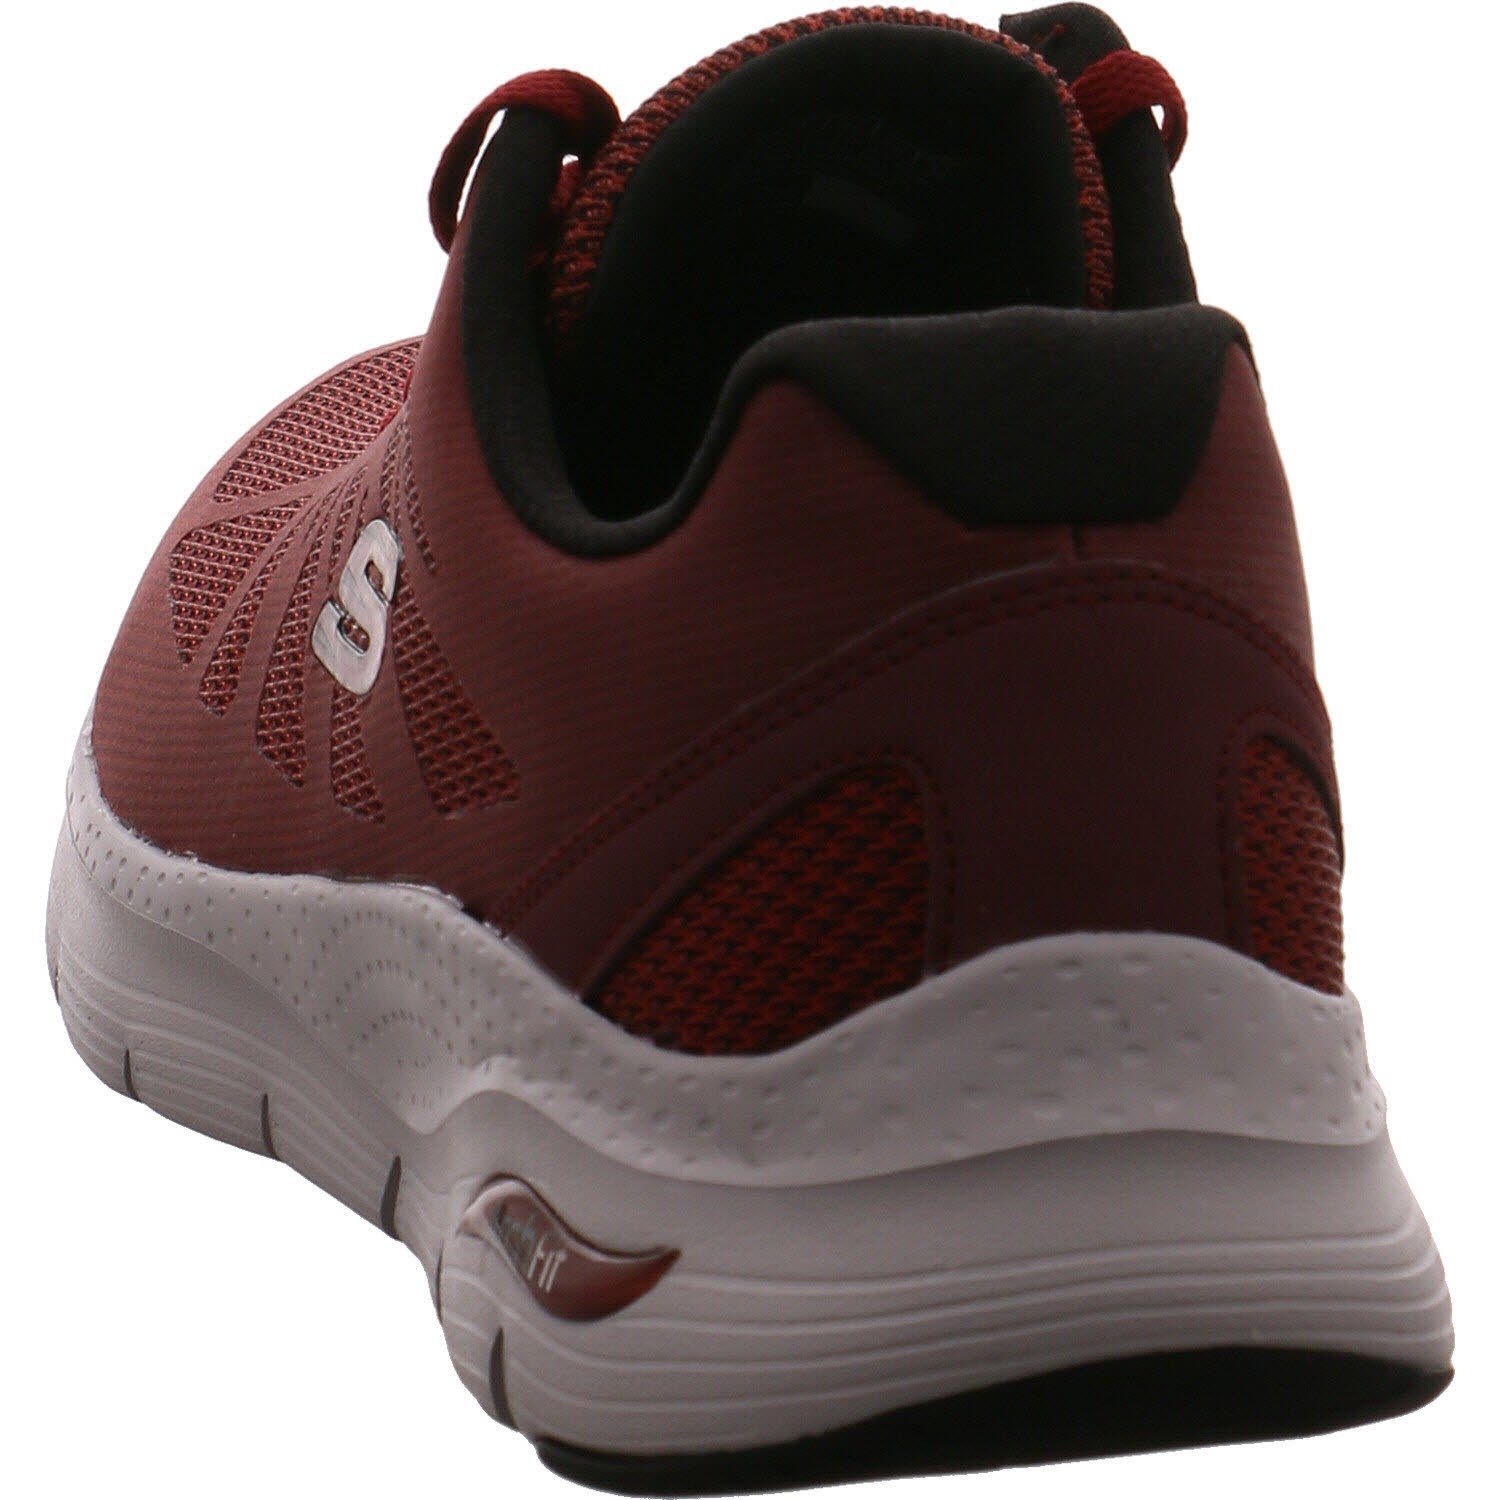 fit Sneaker back charge arch Skechers